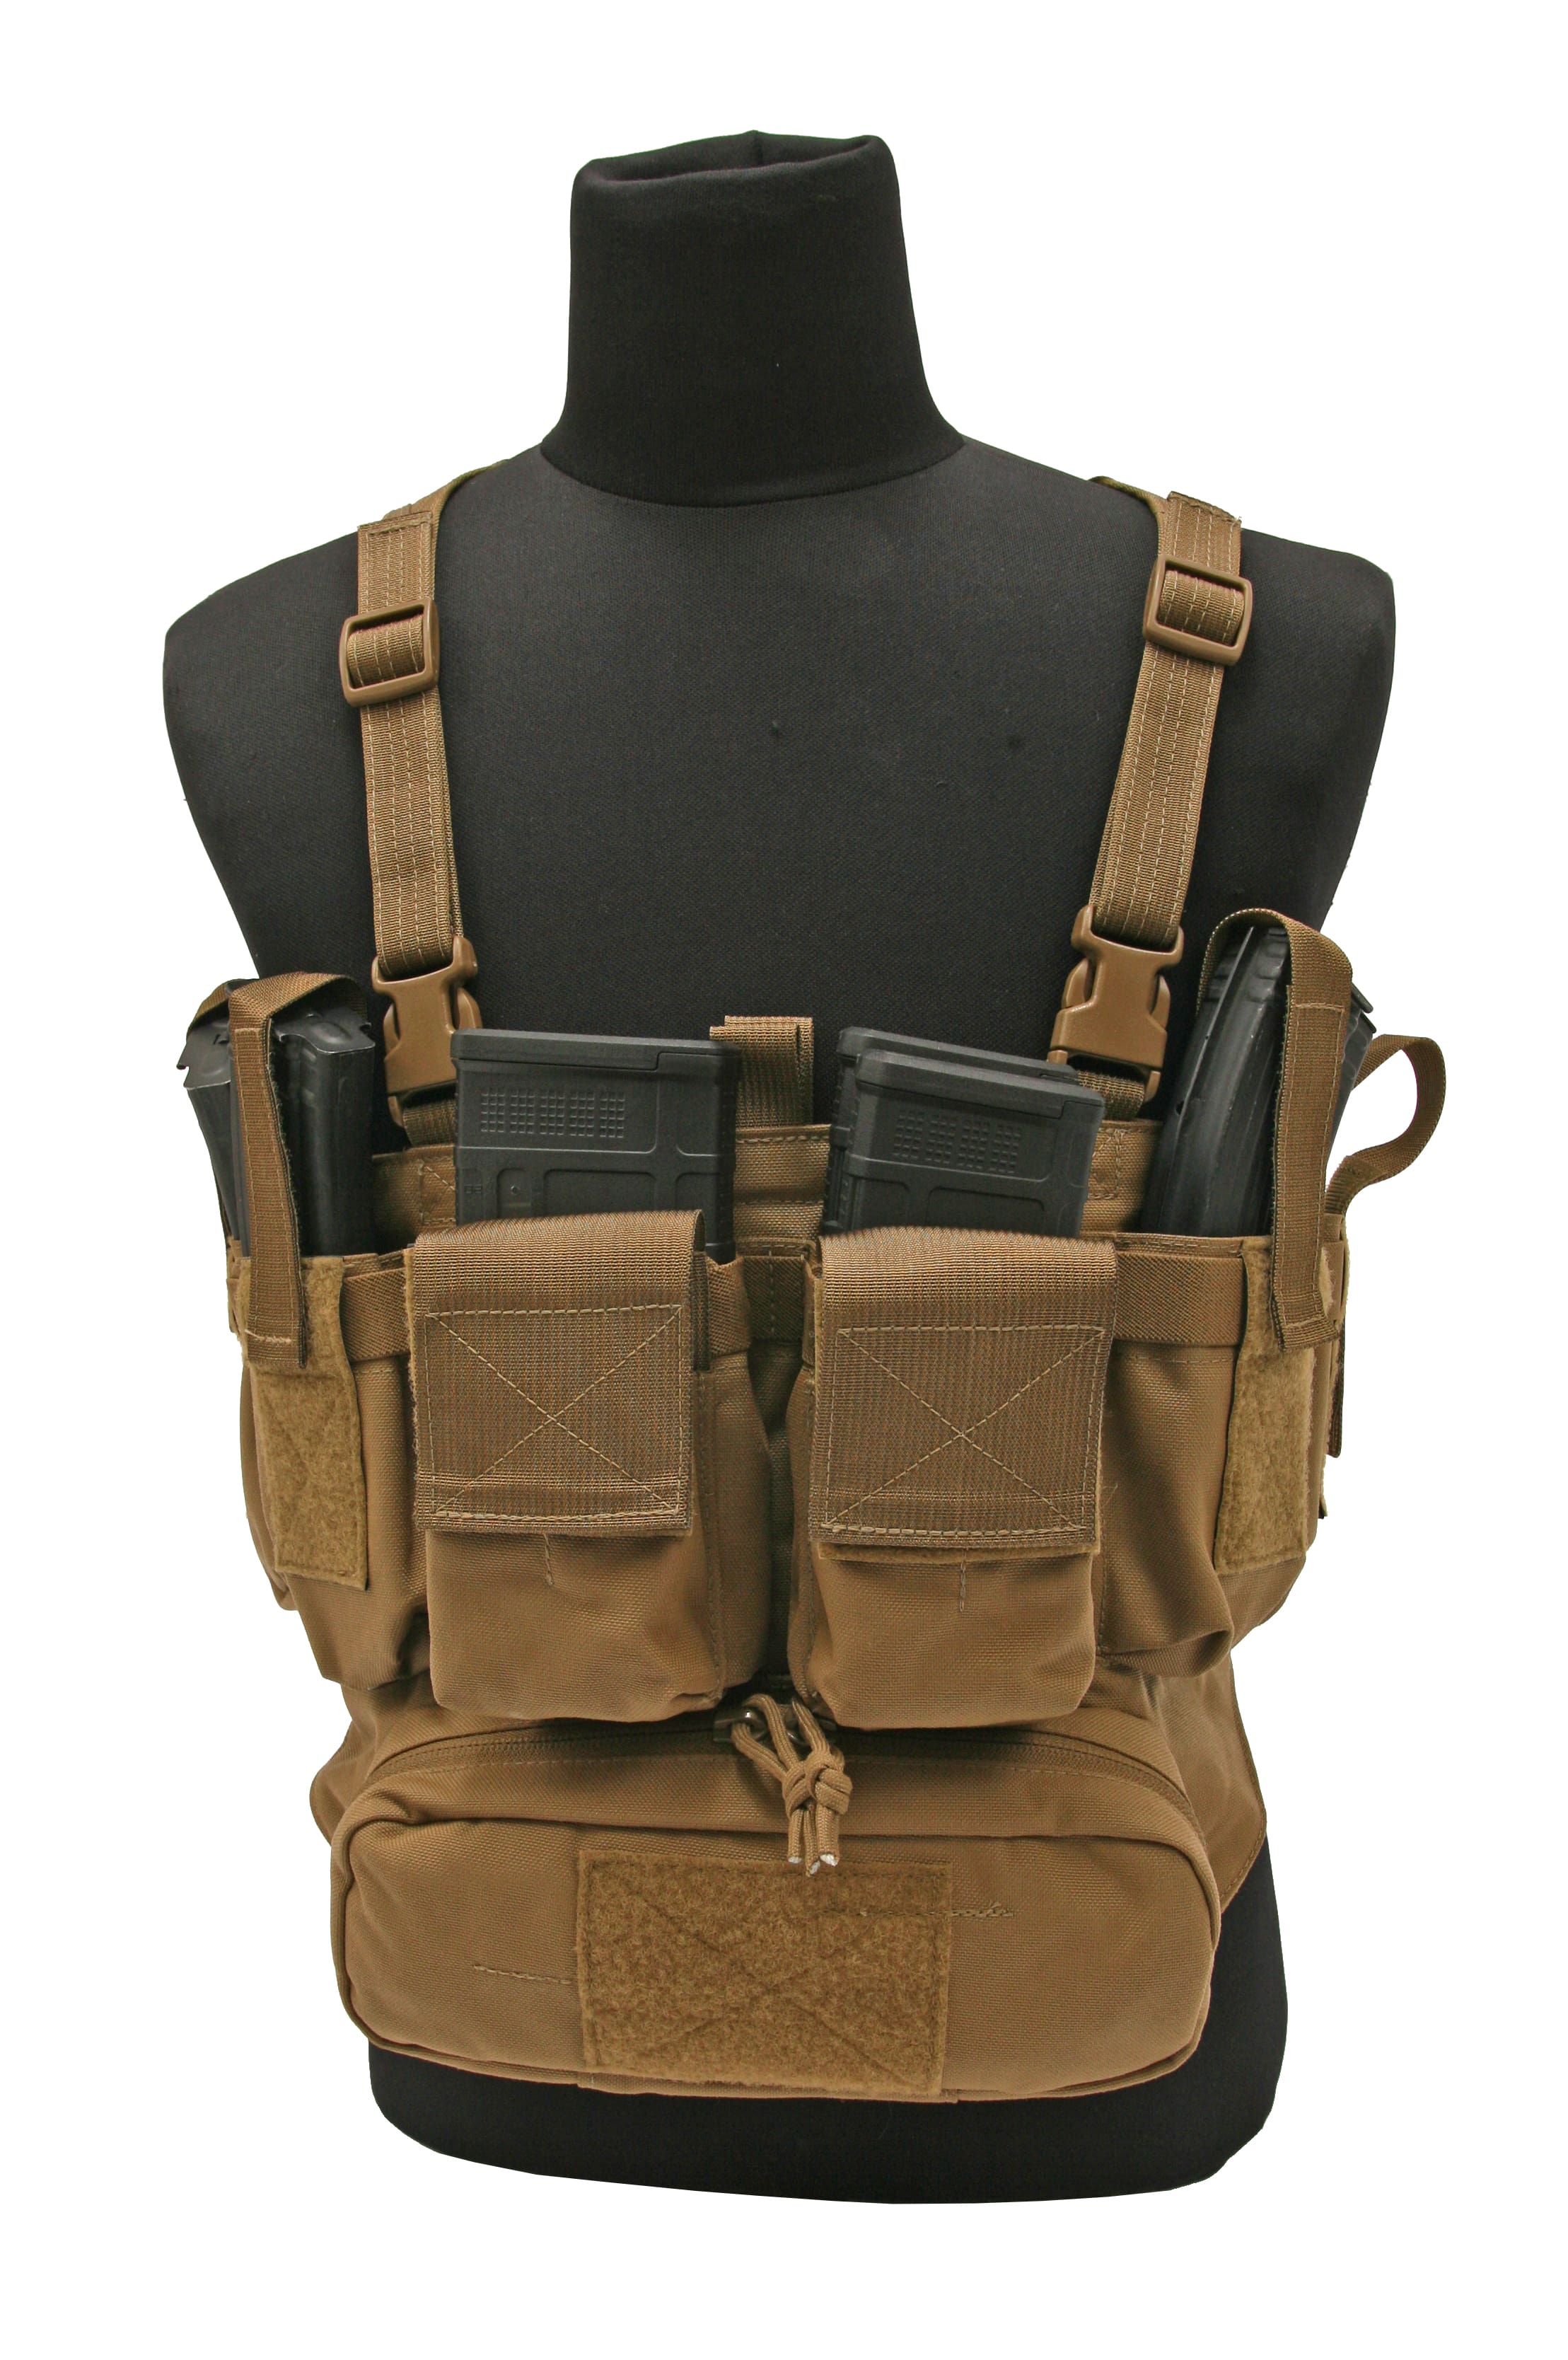 SHOT Show -Tactical Tailor - CSAT Chest Rig | Soldier Systems Daily ...